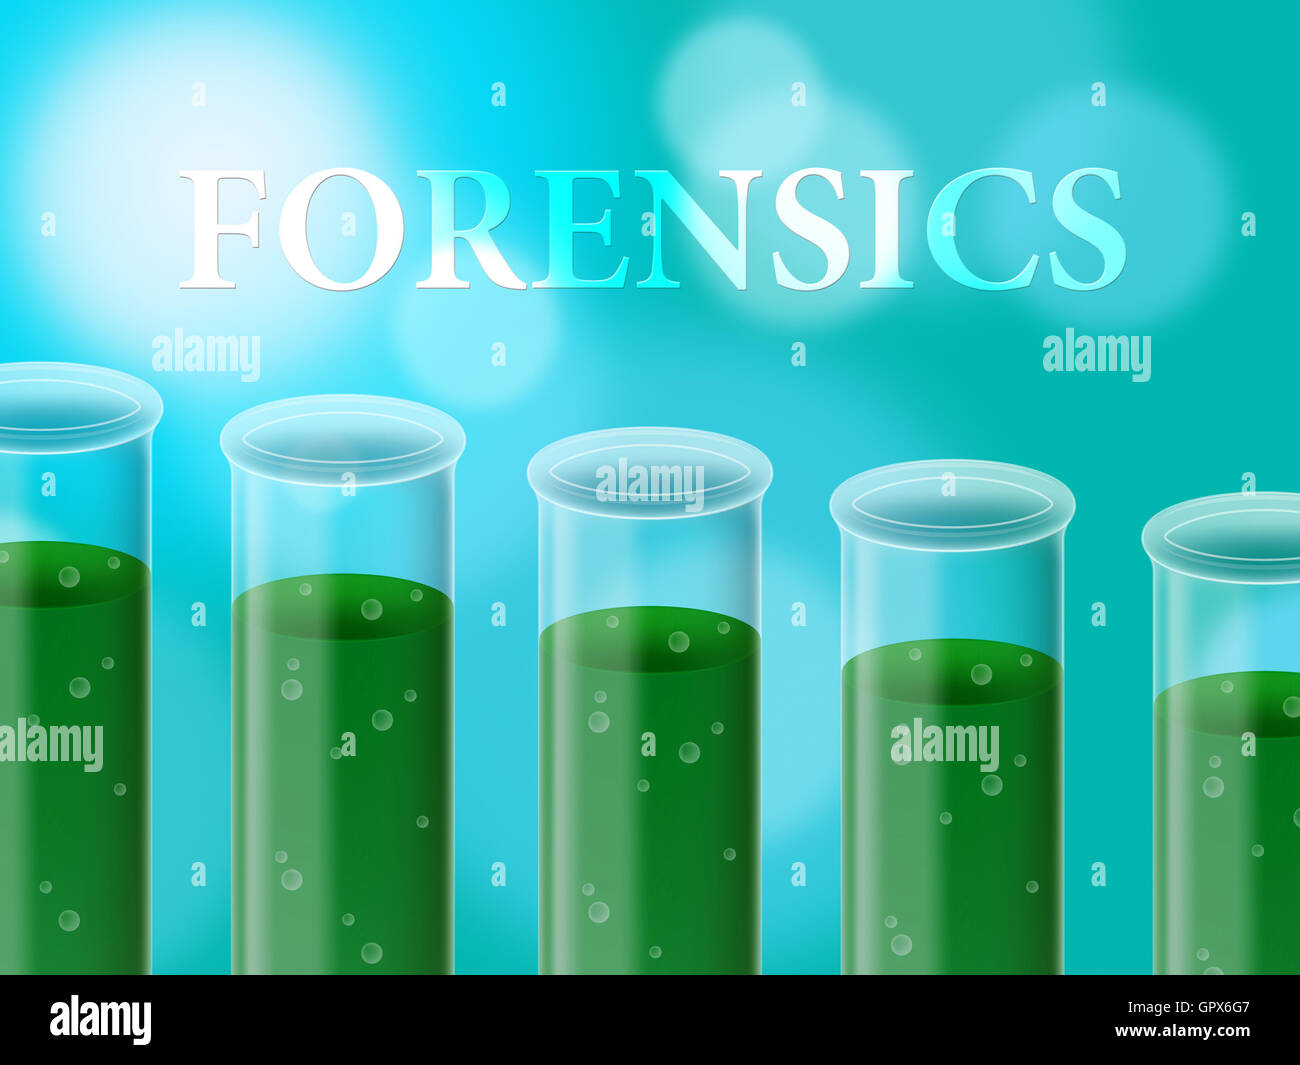 Forensics Research Representing Study Examine And Science Stock Photo